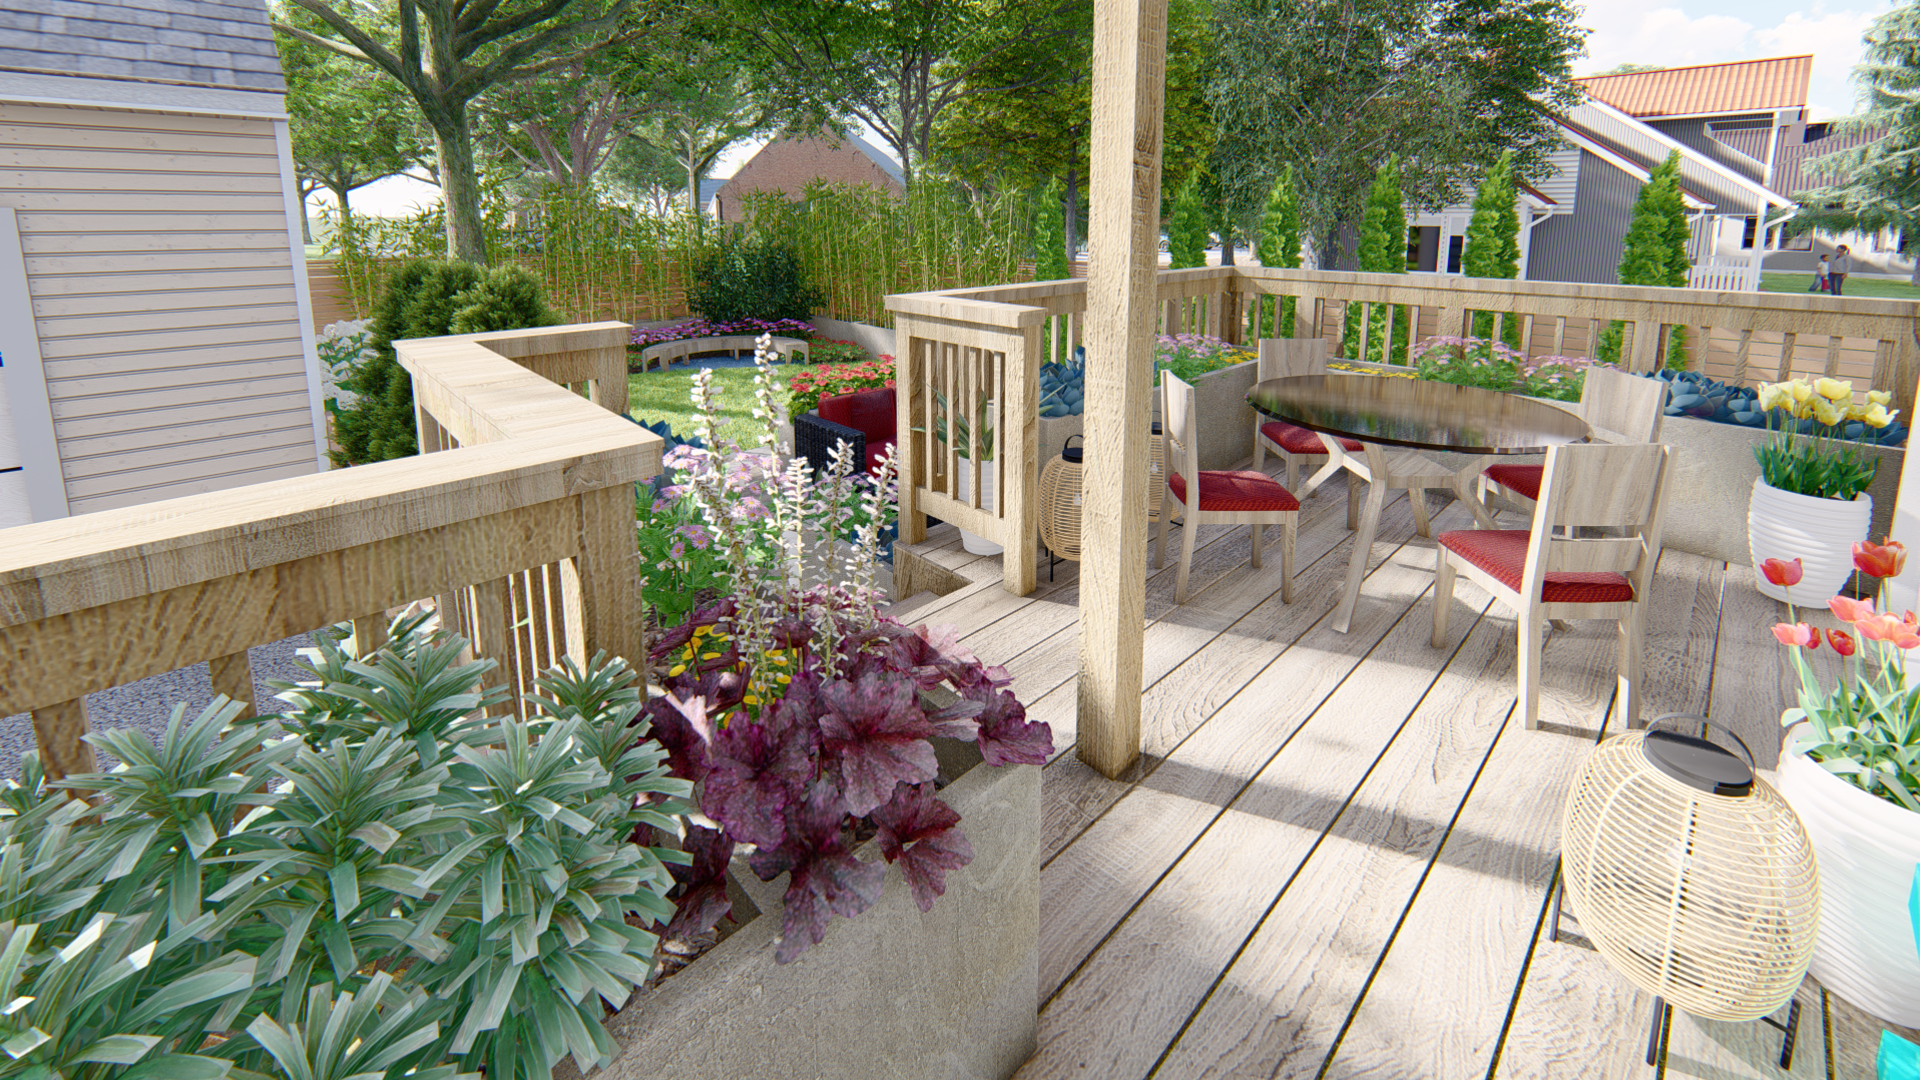 garden furniture on a deck and in a backyard surrounded by flowers